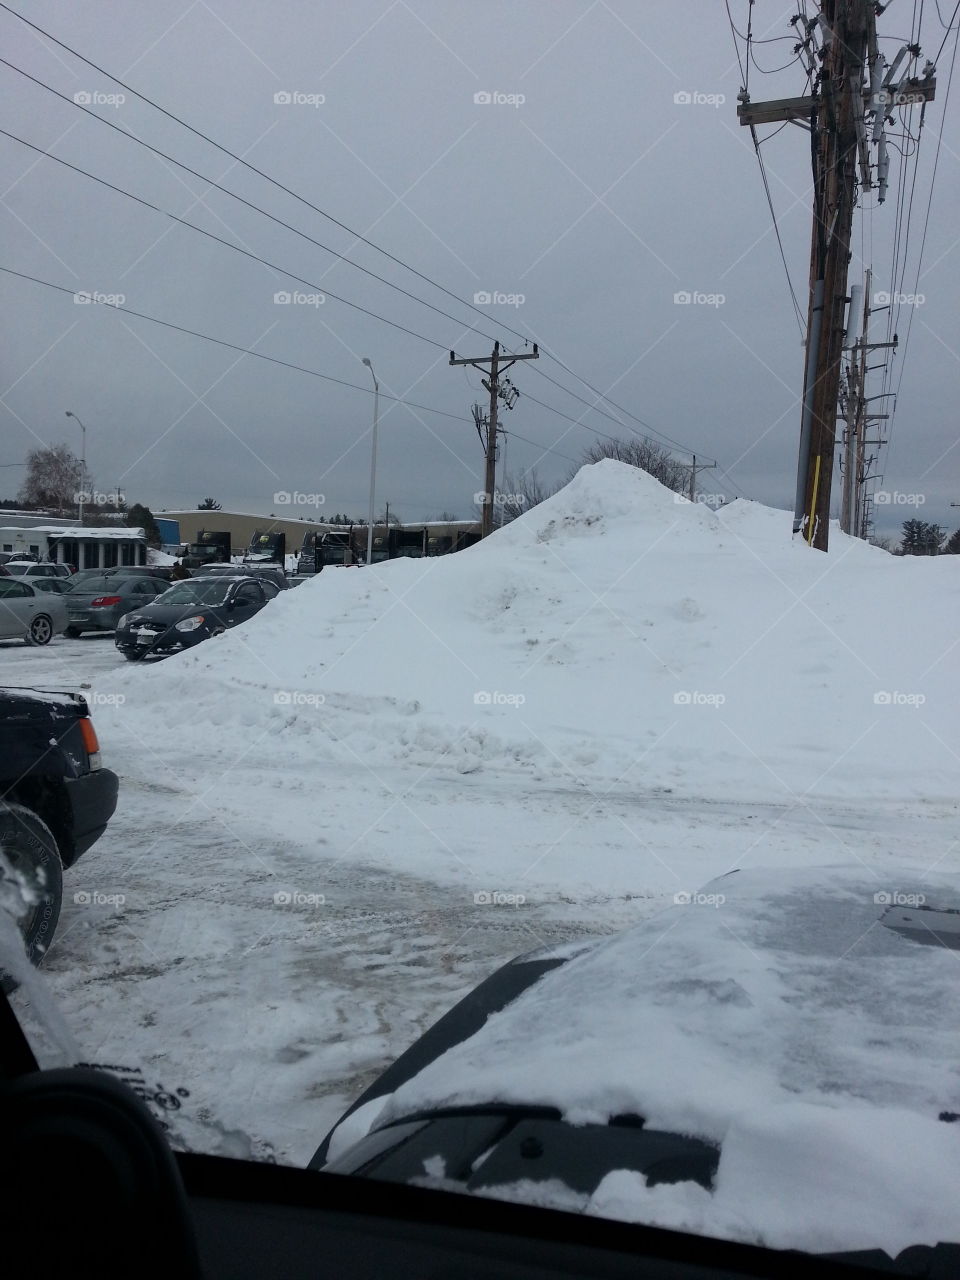 Work snowbank. Too much snow and ice